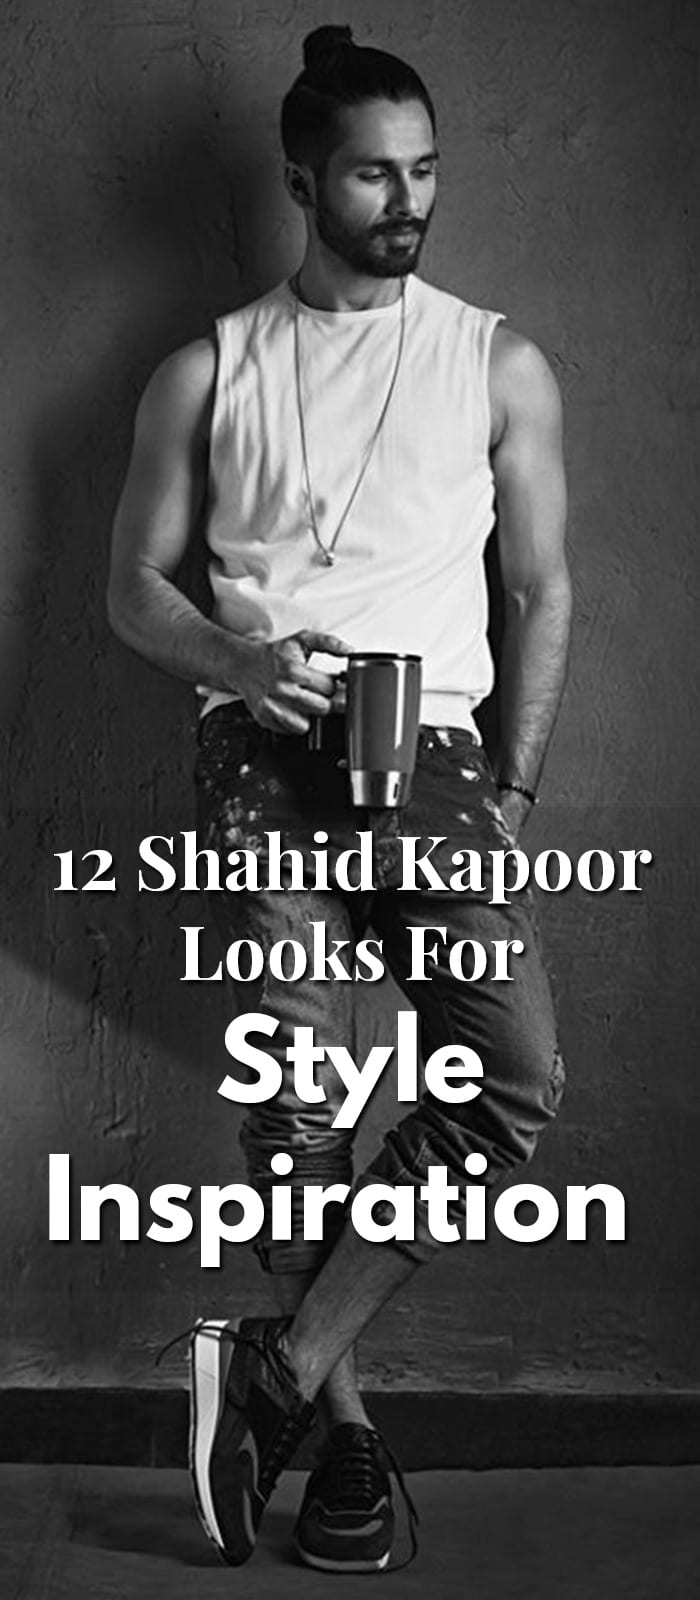 12 Shahid Kapoor Looks For Style Inspiration